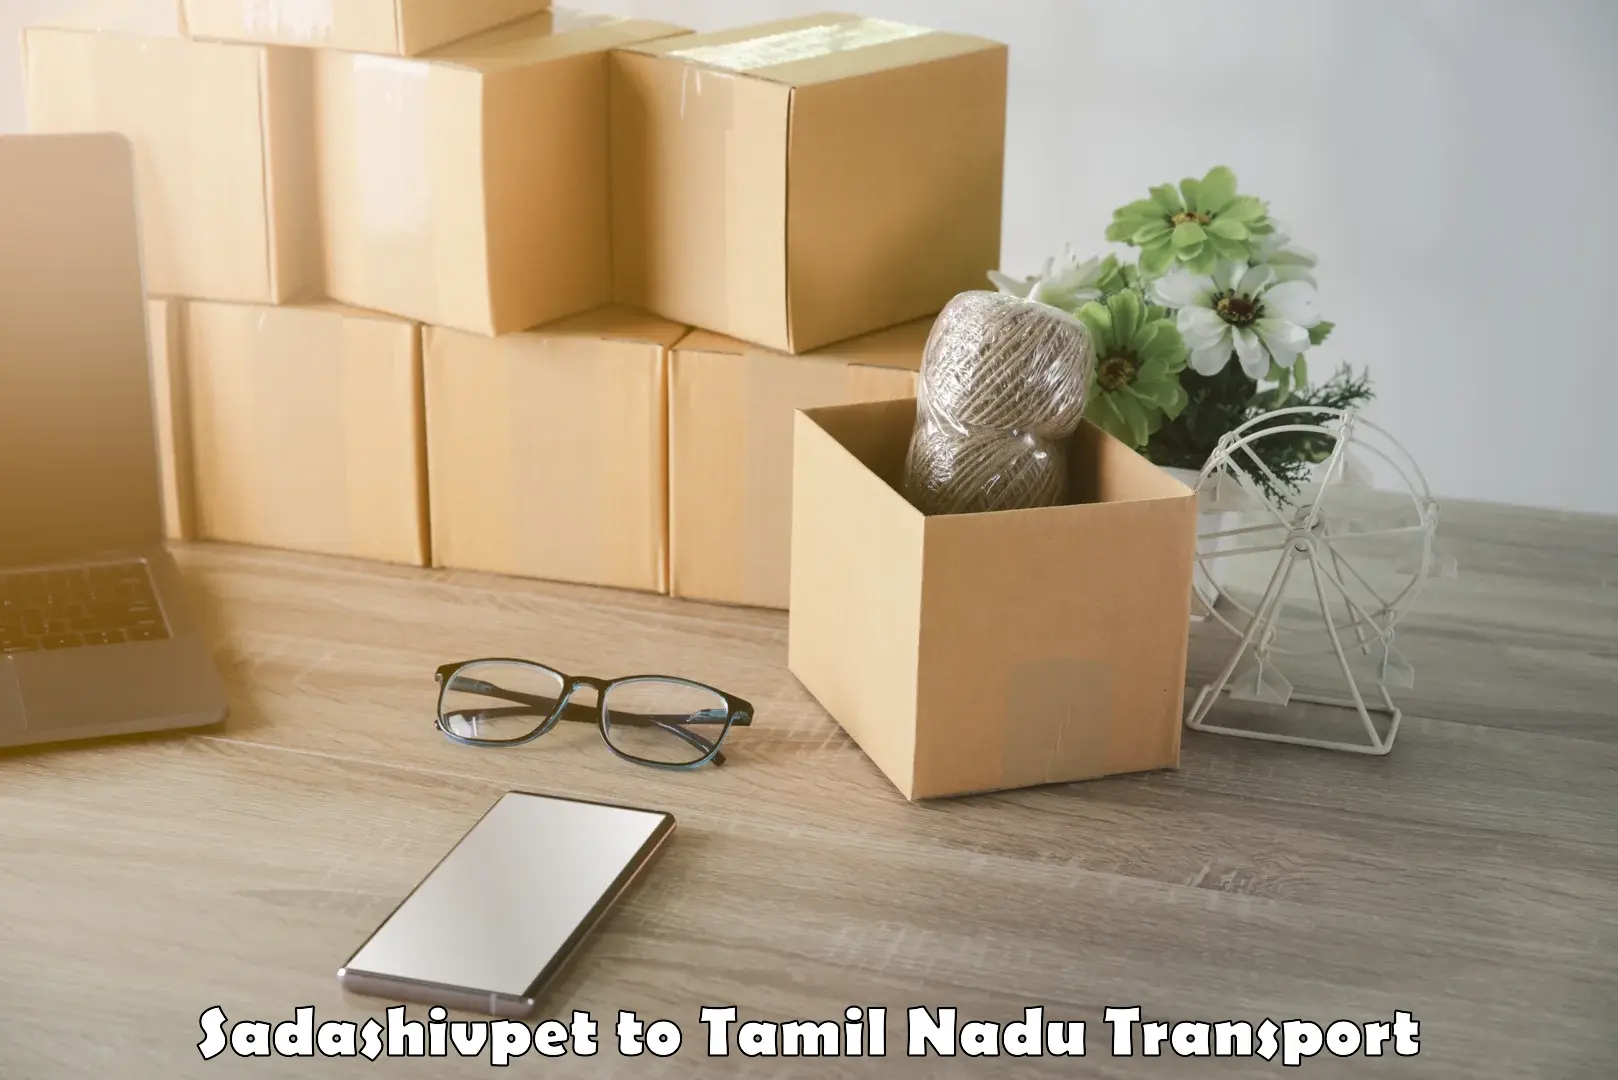 Online transport service Sadashivpet to Vellore Institute of Technology